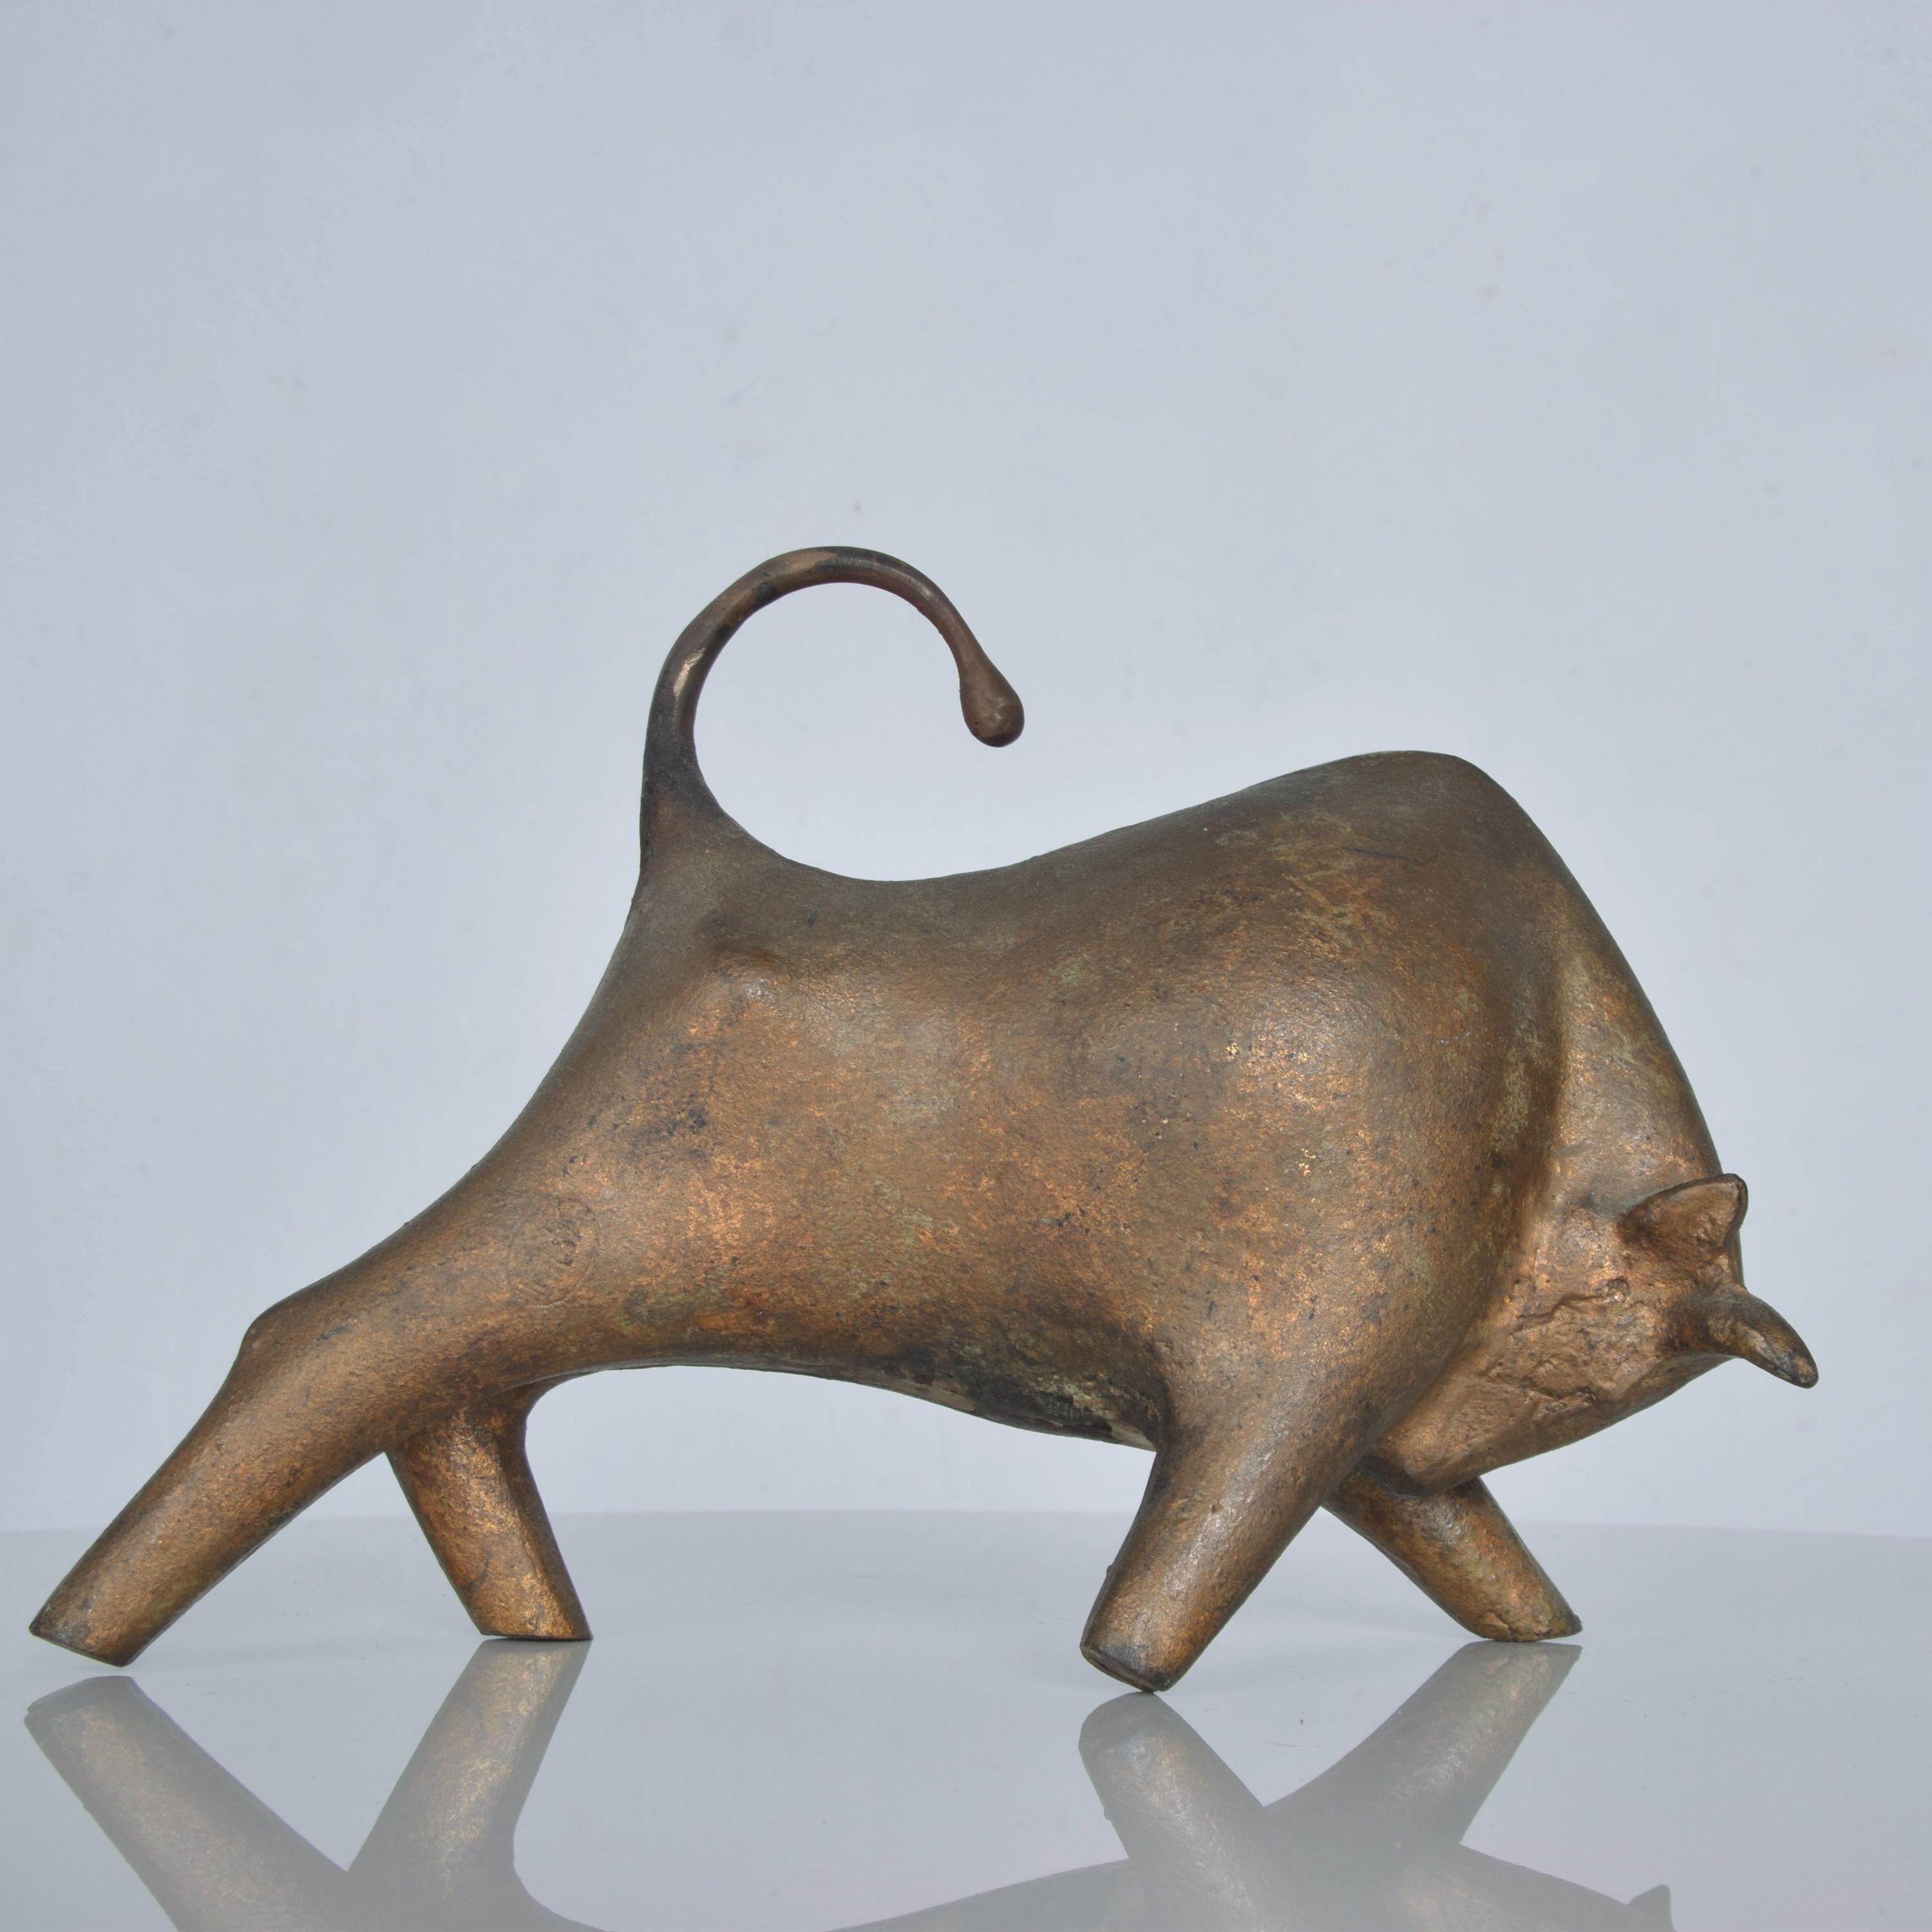 Beautiful sculptural cast iron charging bull midcentury modernism, Japan, 1960s
Brutalist / modernist sculpture of a charging bull in the style of Miyazawa Kanae.
Patinated surface with gold leaf details
Original vintage patinated piece